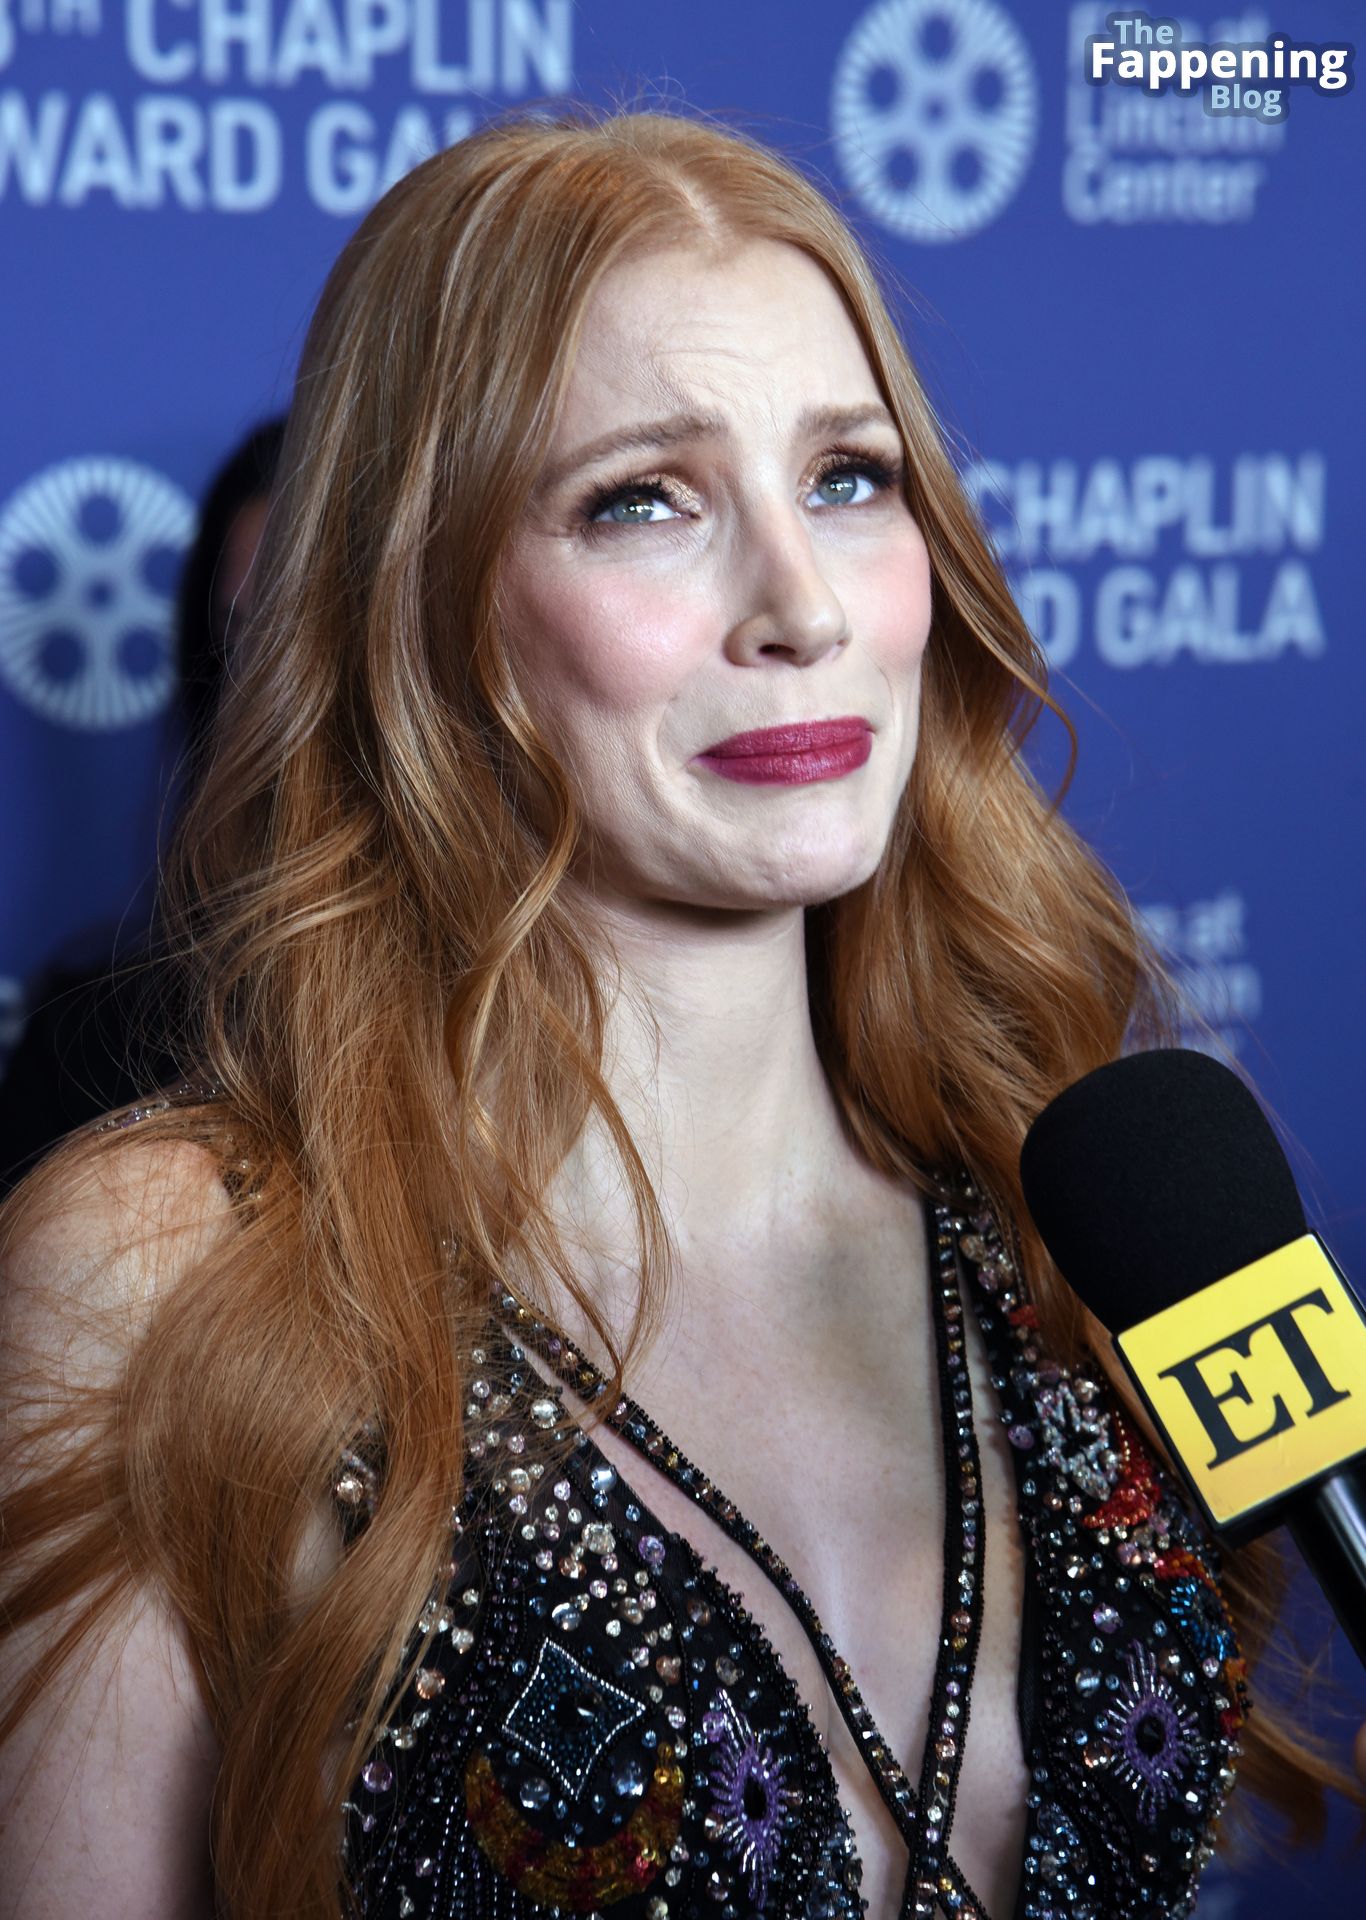 Jessica-Chastain-Sexy-The-Fappening-Blog-125.jpg